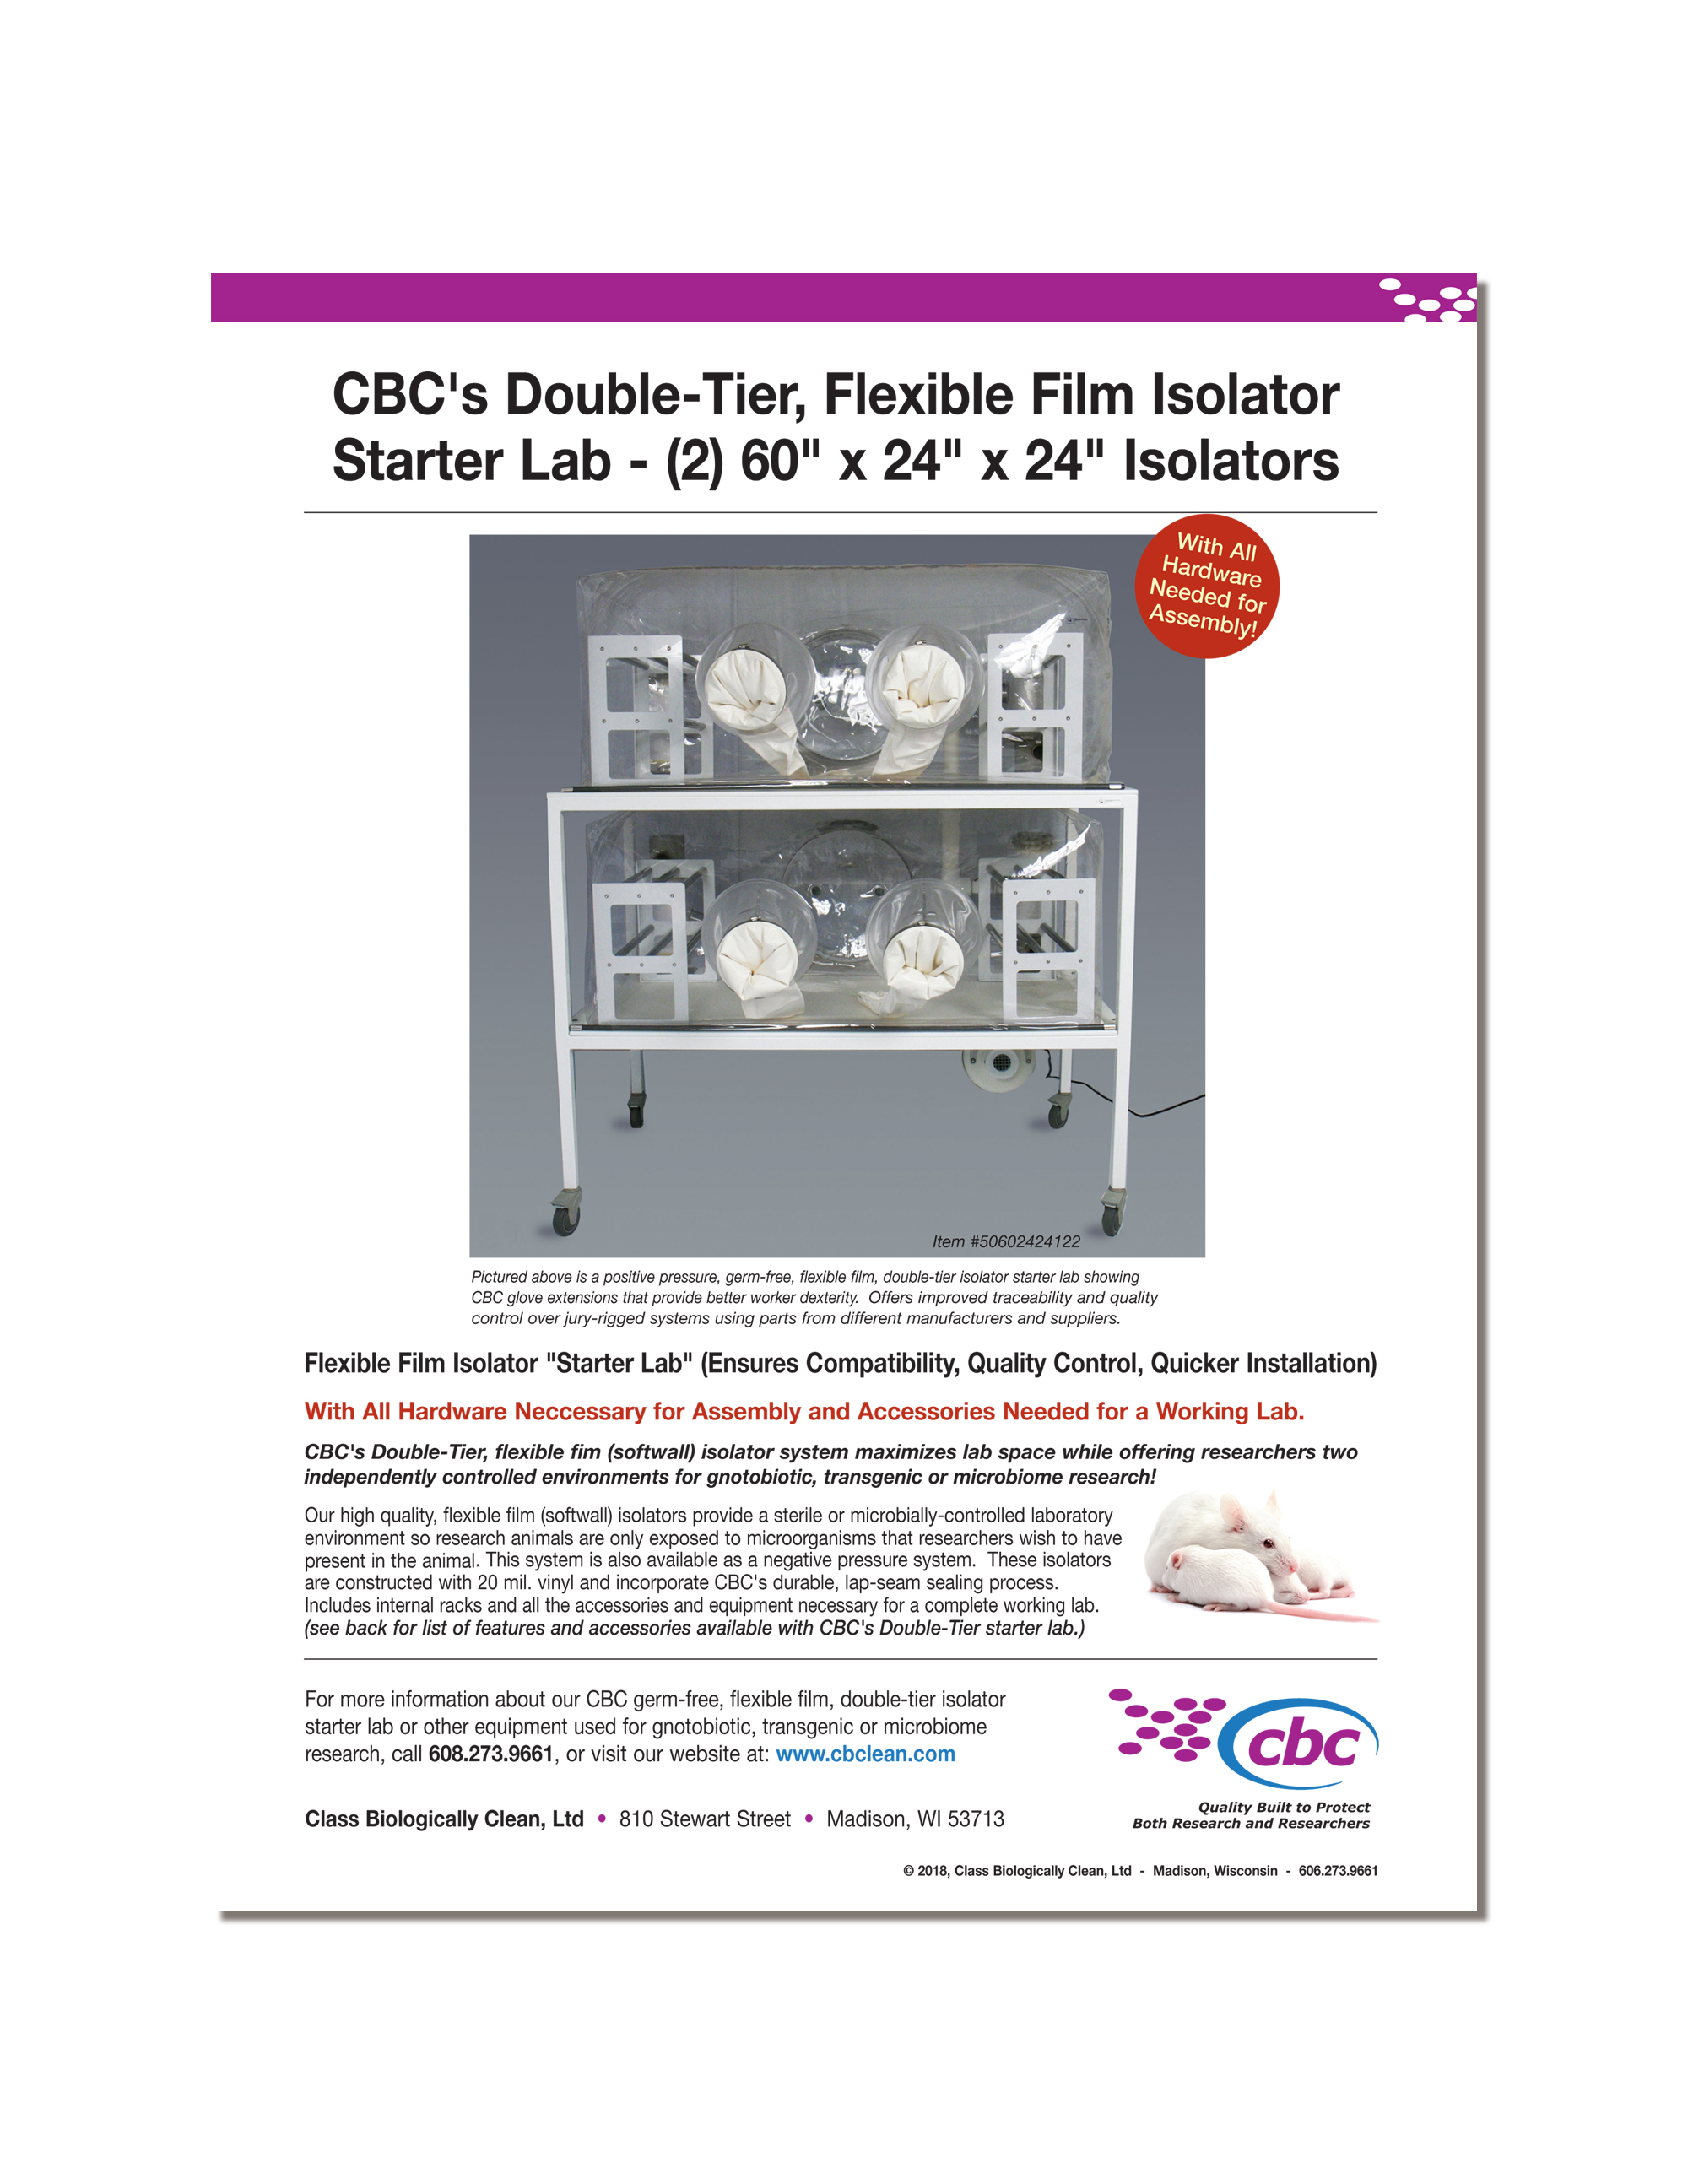 The CBC Double-tier flexible film starter lab comes with all the lab hardware and accessories needed for researchers to install a fully functional germ free lab that offers complete environmental control for gnotobiotic, microbiome and other research using mice or other rodents. Click here to download flyer.